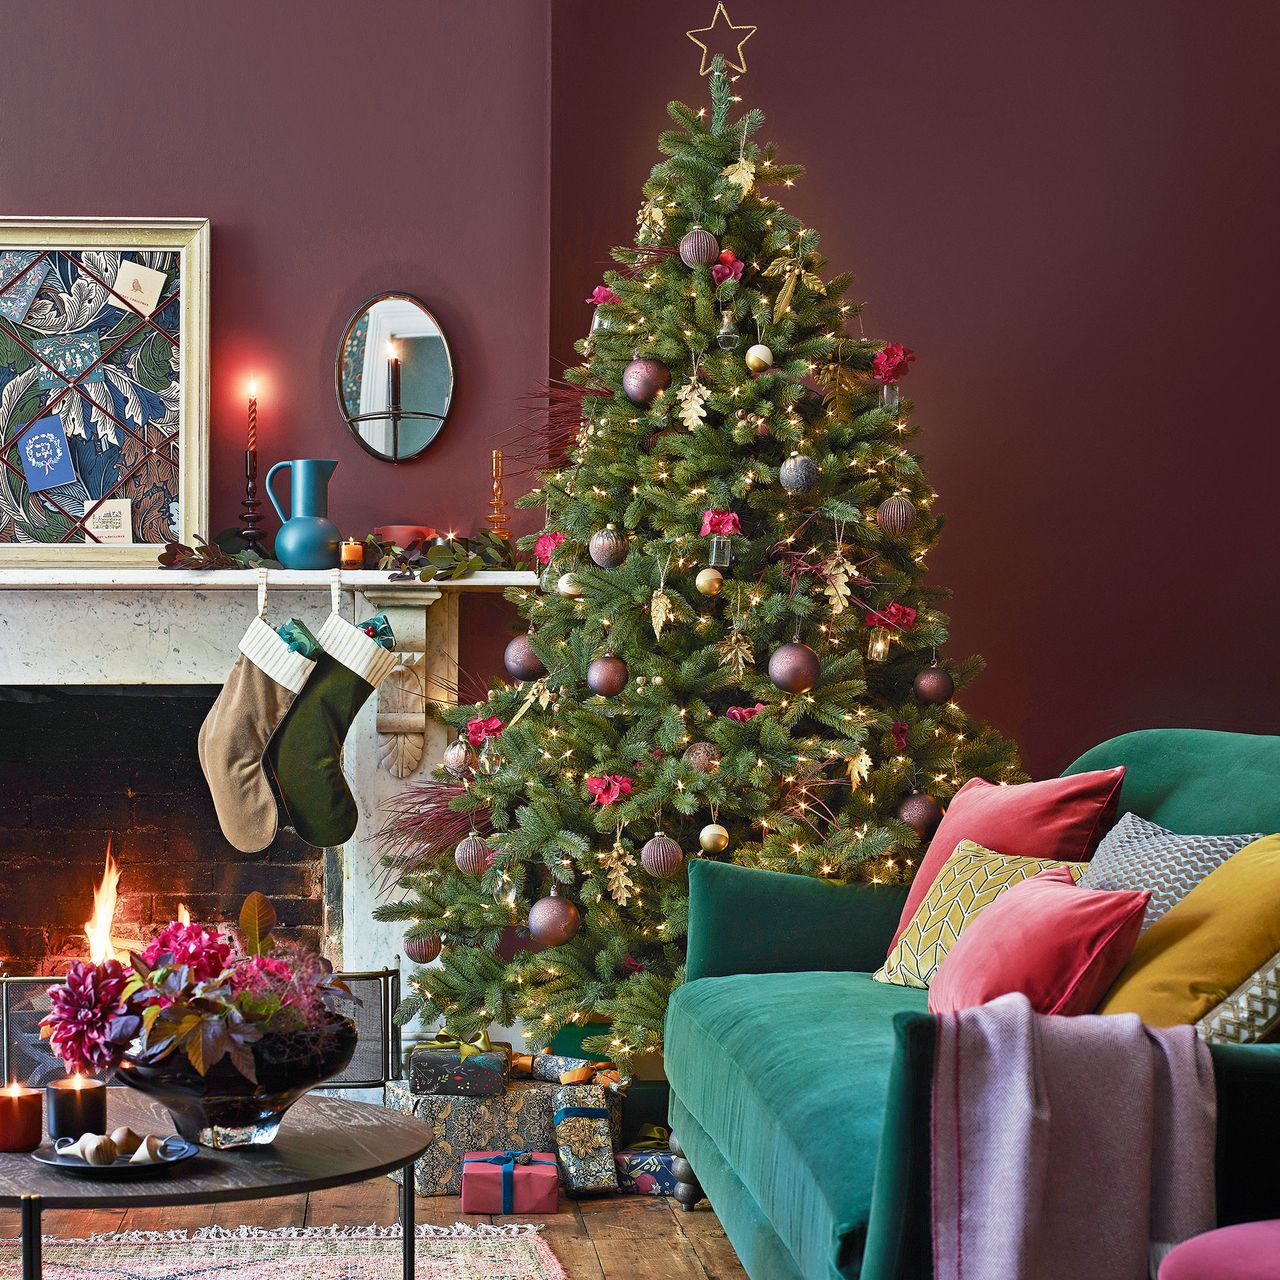 How to choose and care for a real Christmas tree | Ideal Home